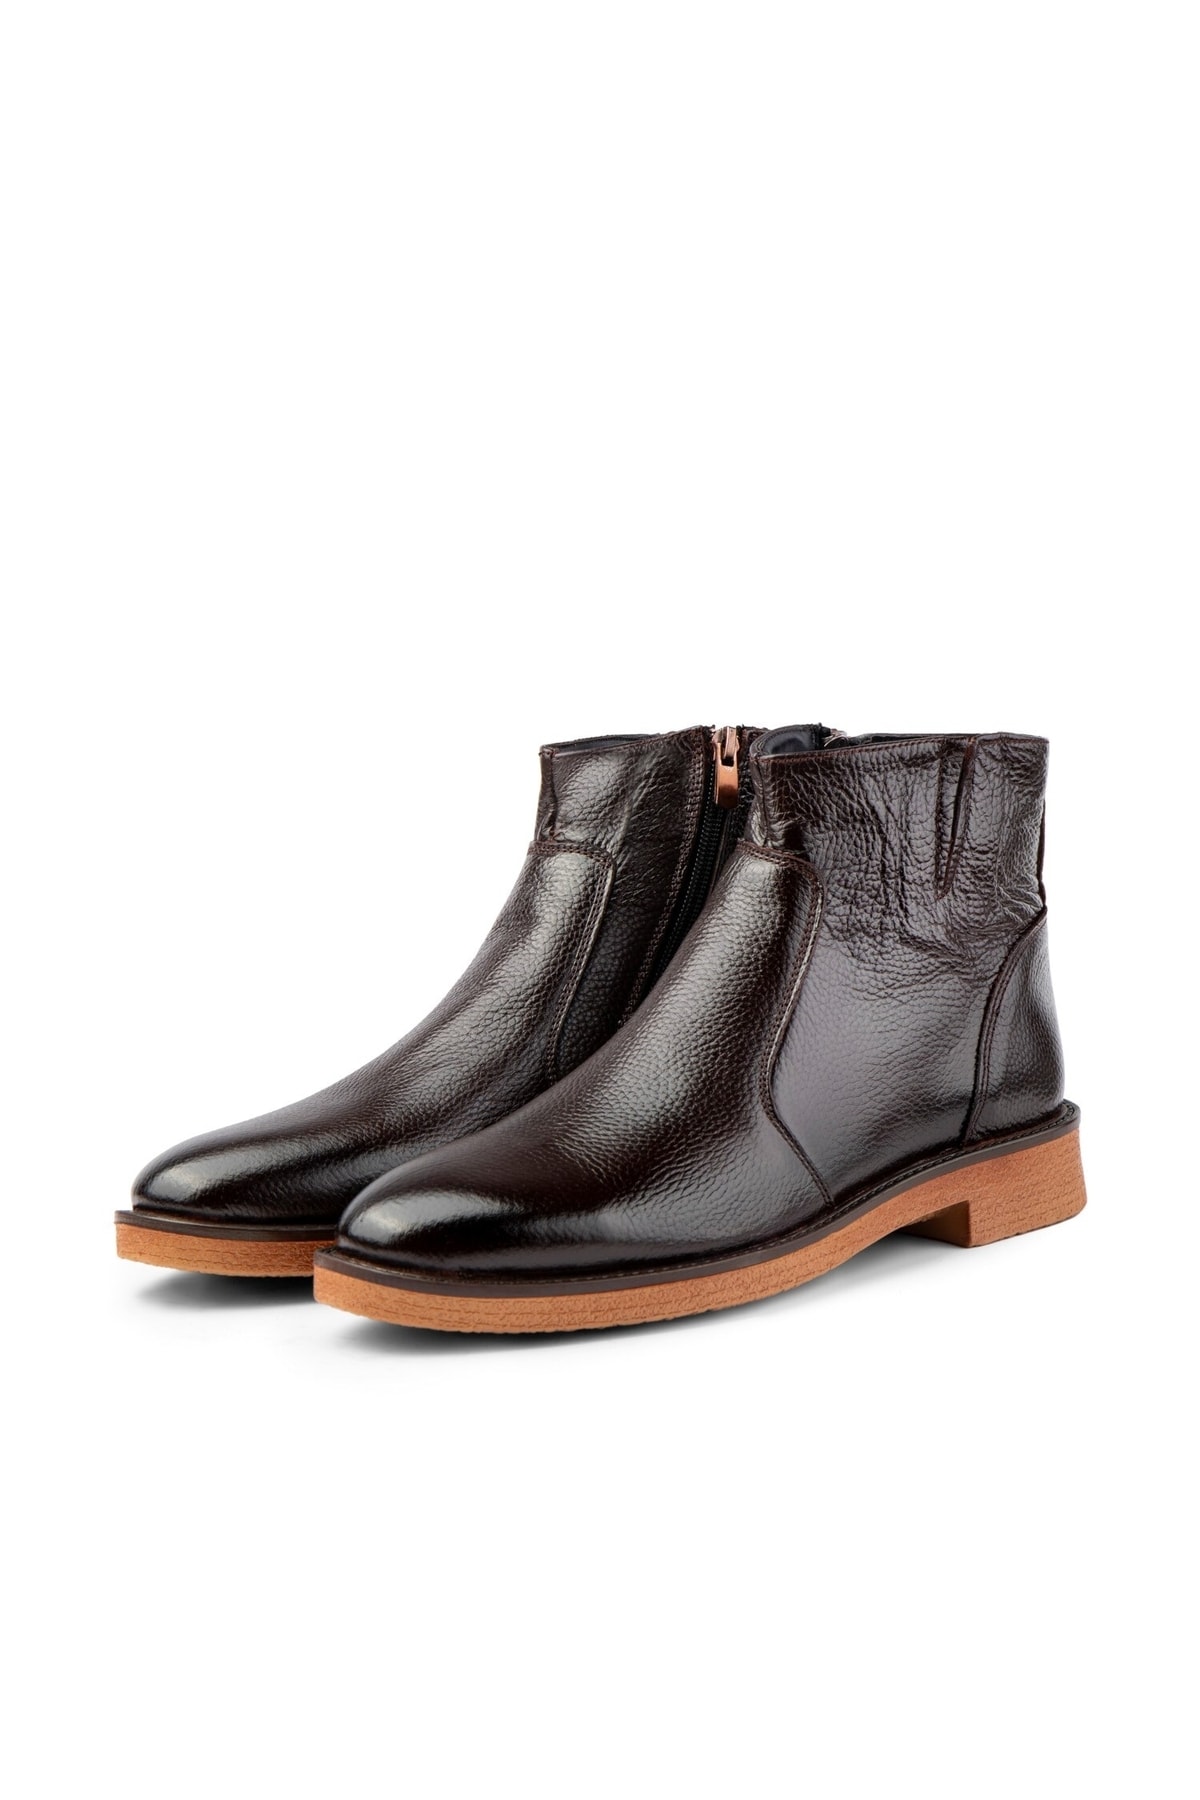 Levně Ducavelli Bristol Genuine Leather Non-Slip Sole With Zipper Chelsea Daily Boots Brown.